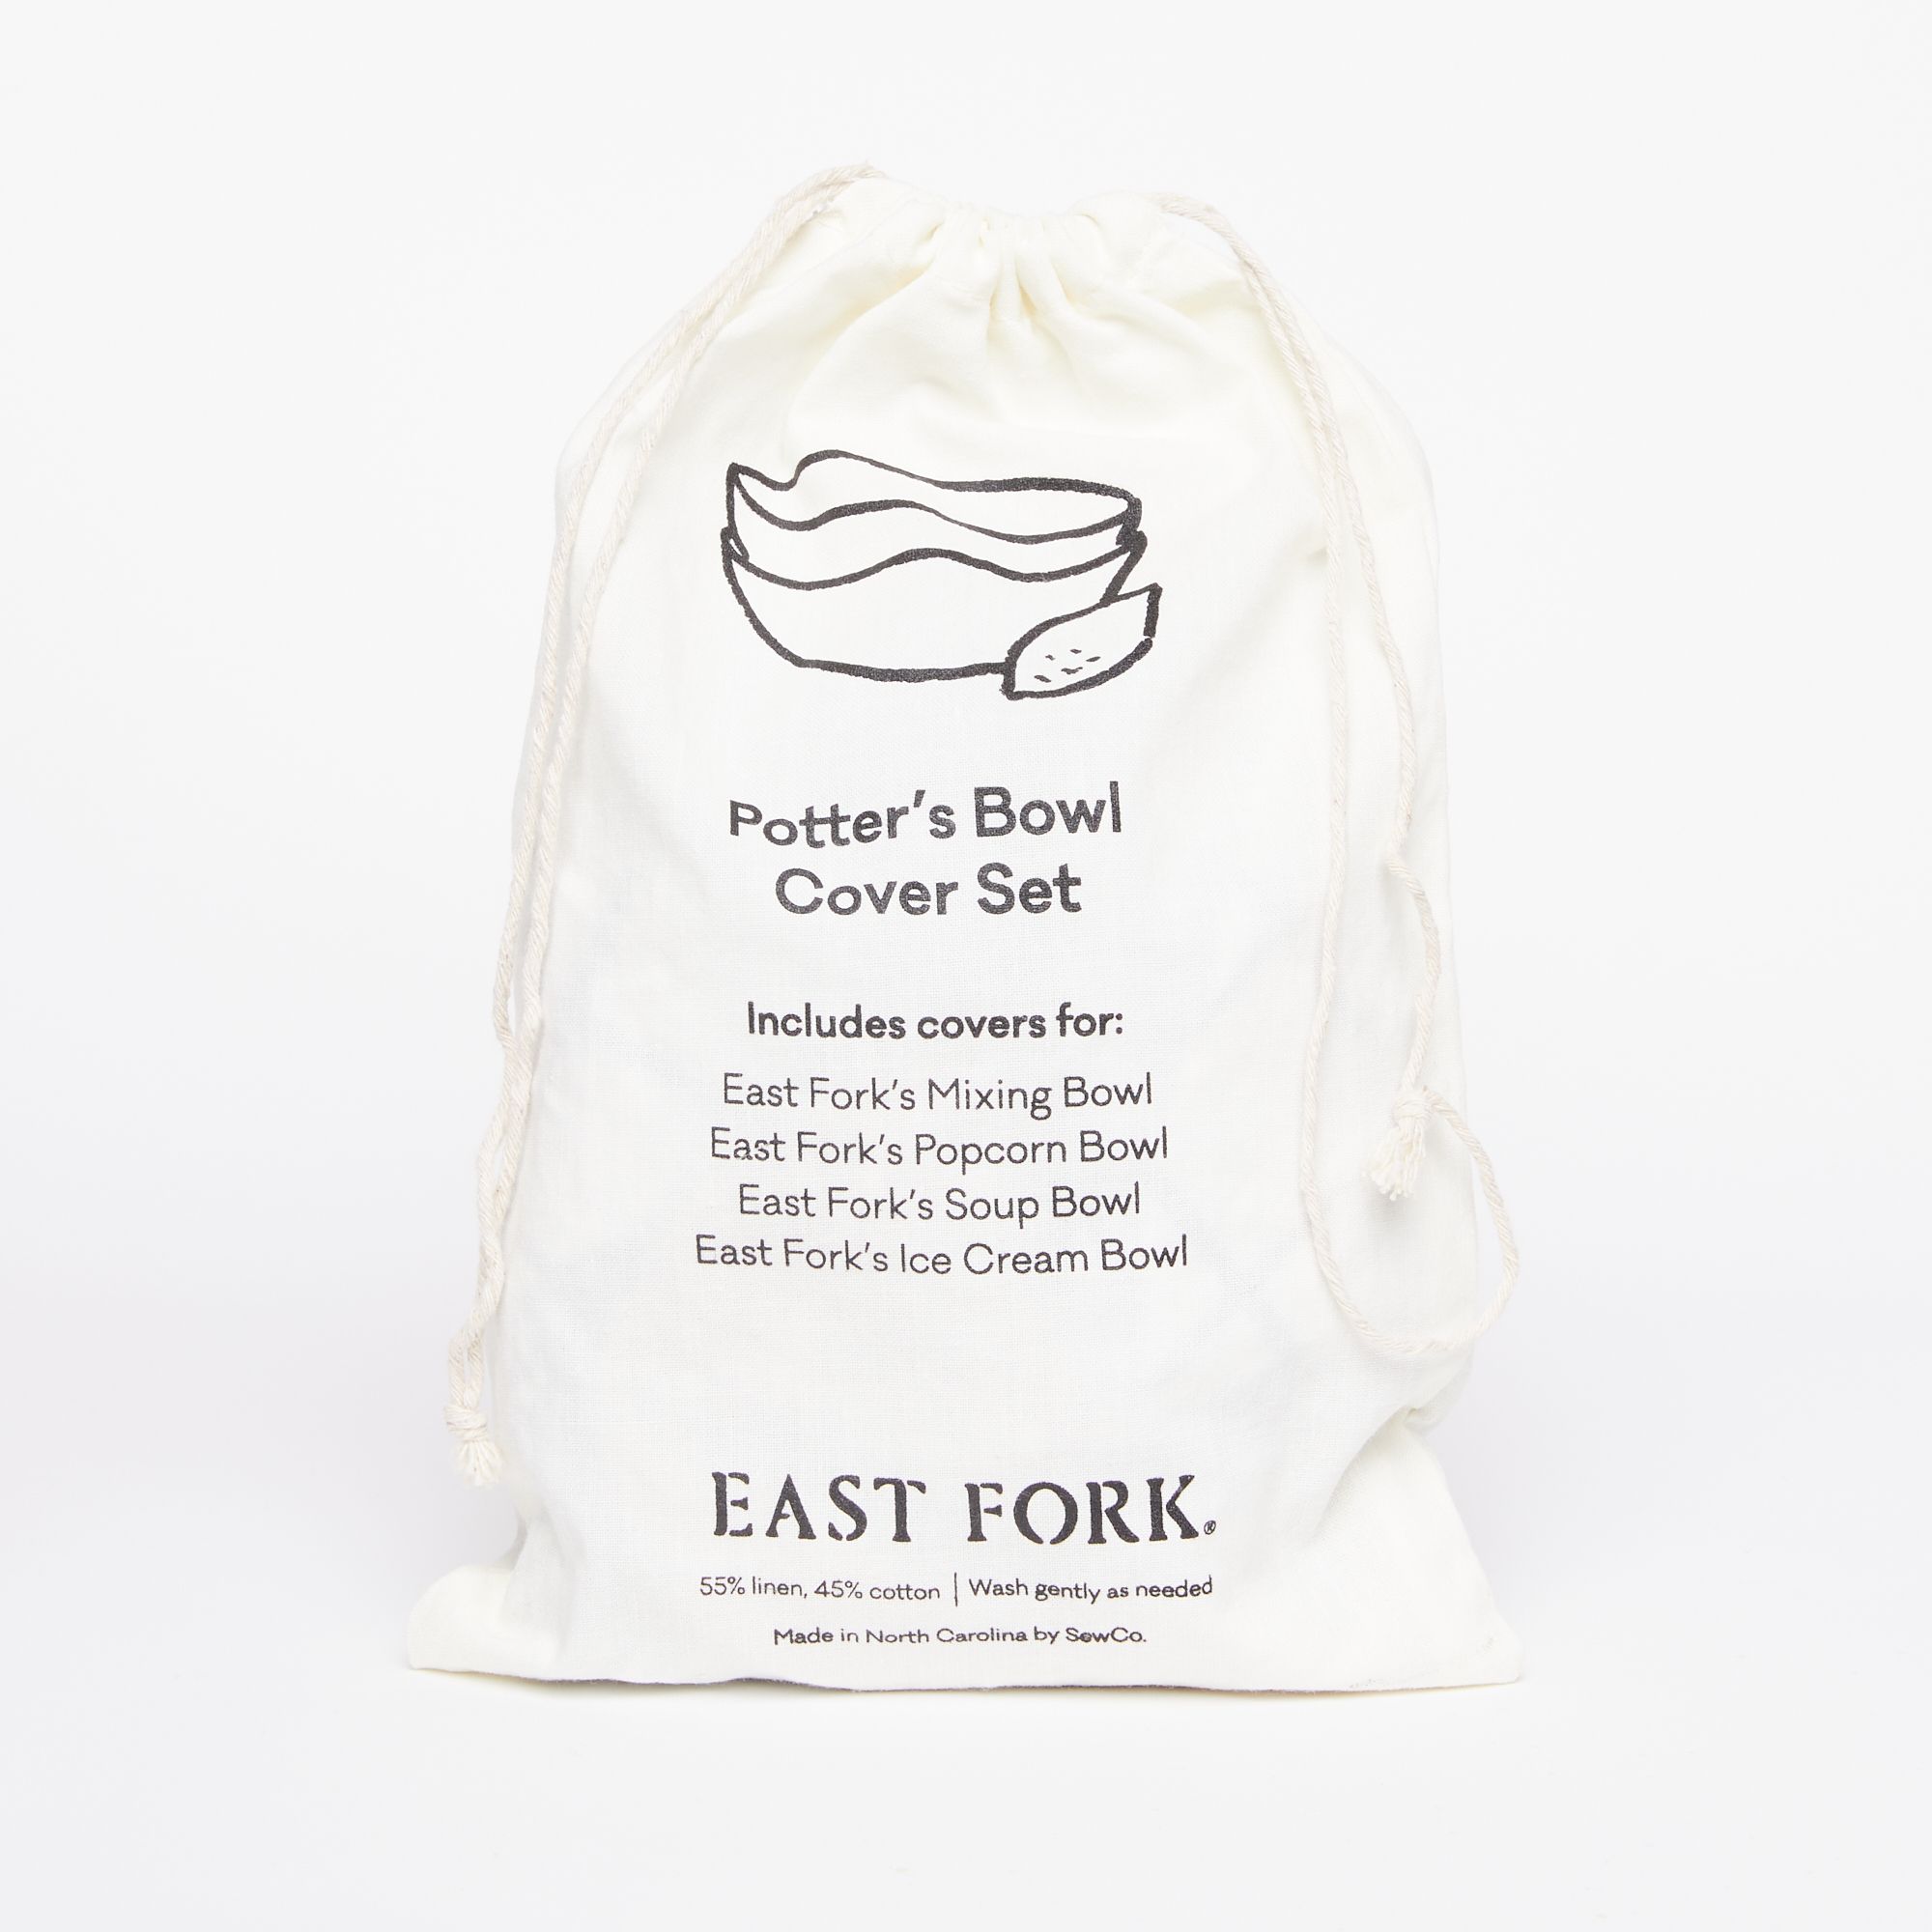 White linen drawstring bag that says Potter's Bowl Cover Set with product details